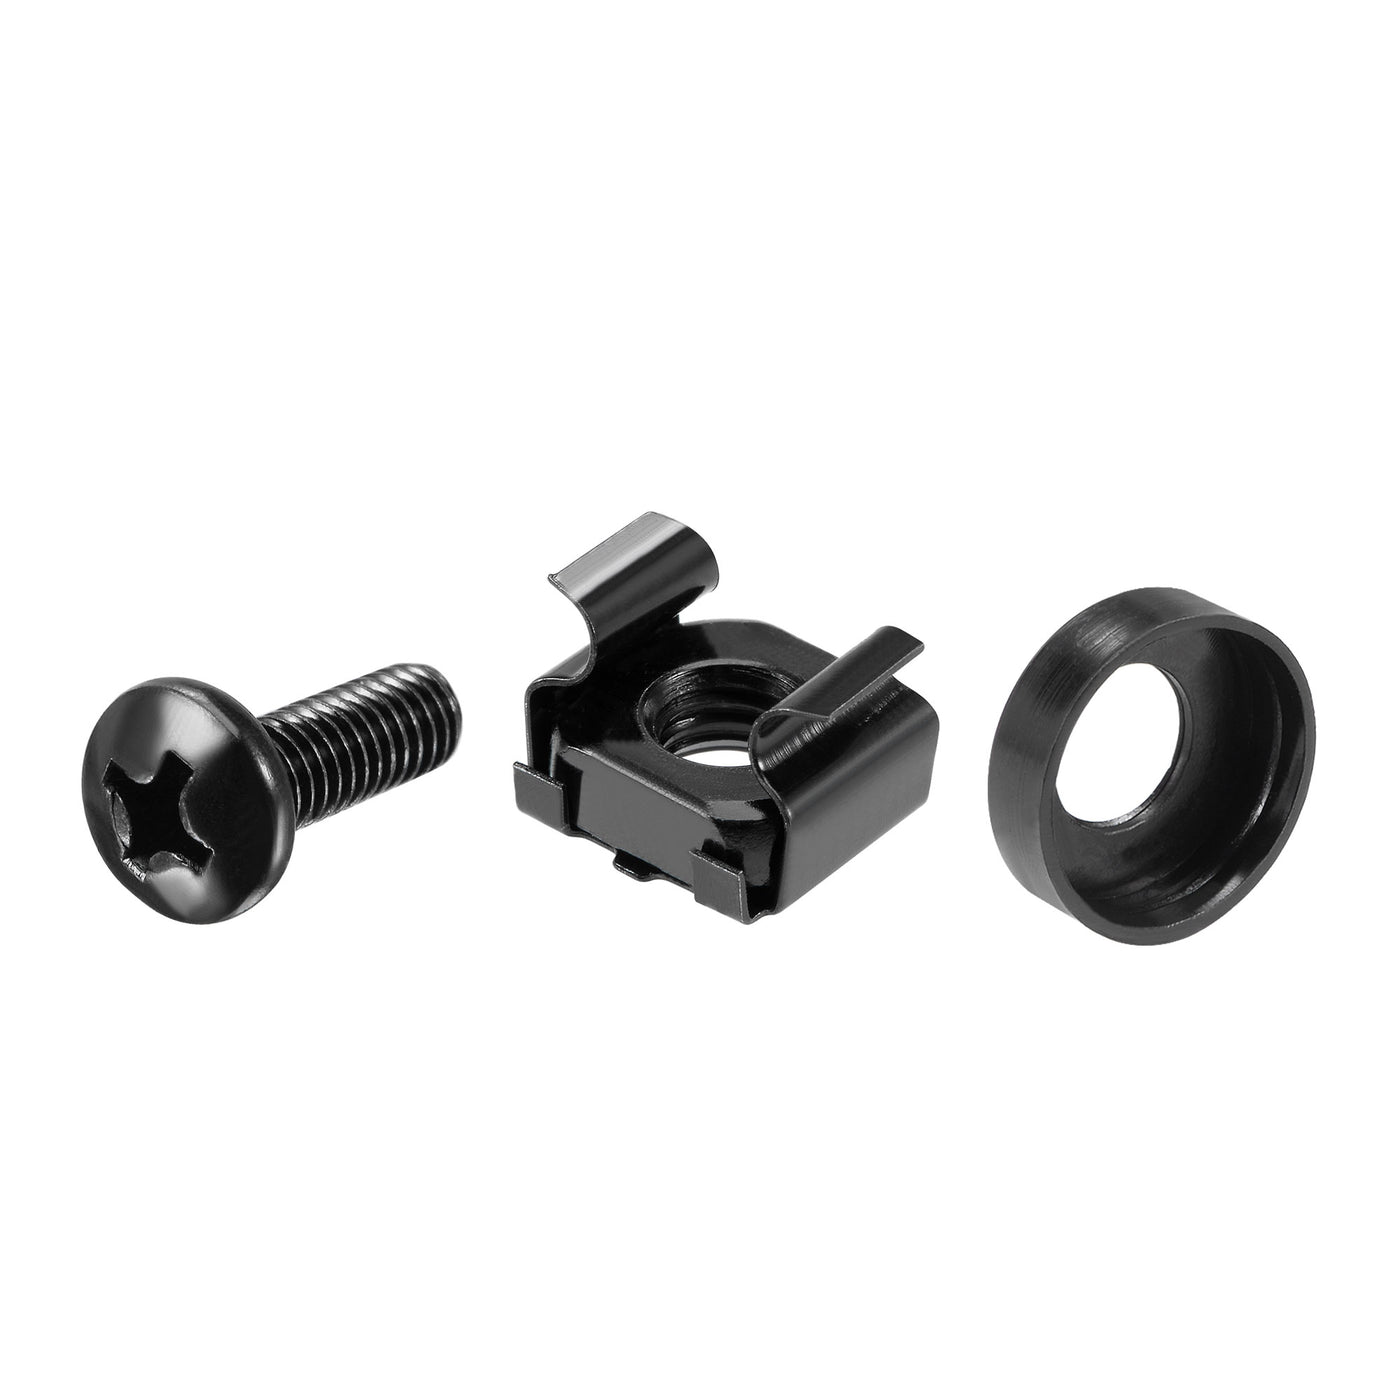 uxcell Uxcell M6x16mm Server Rack Cage Nuts Black 25Set, Mounting Screws for Server Shelves